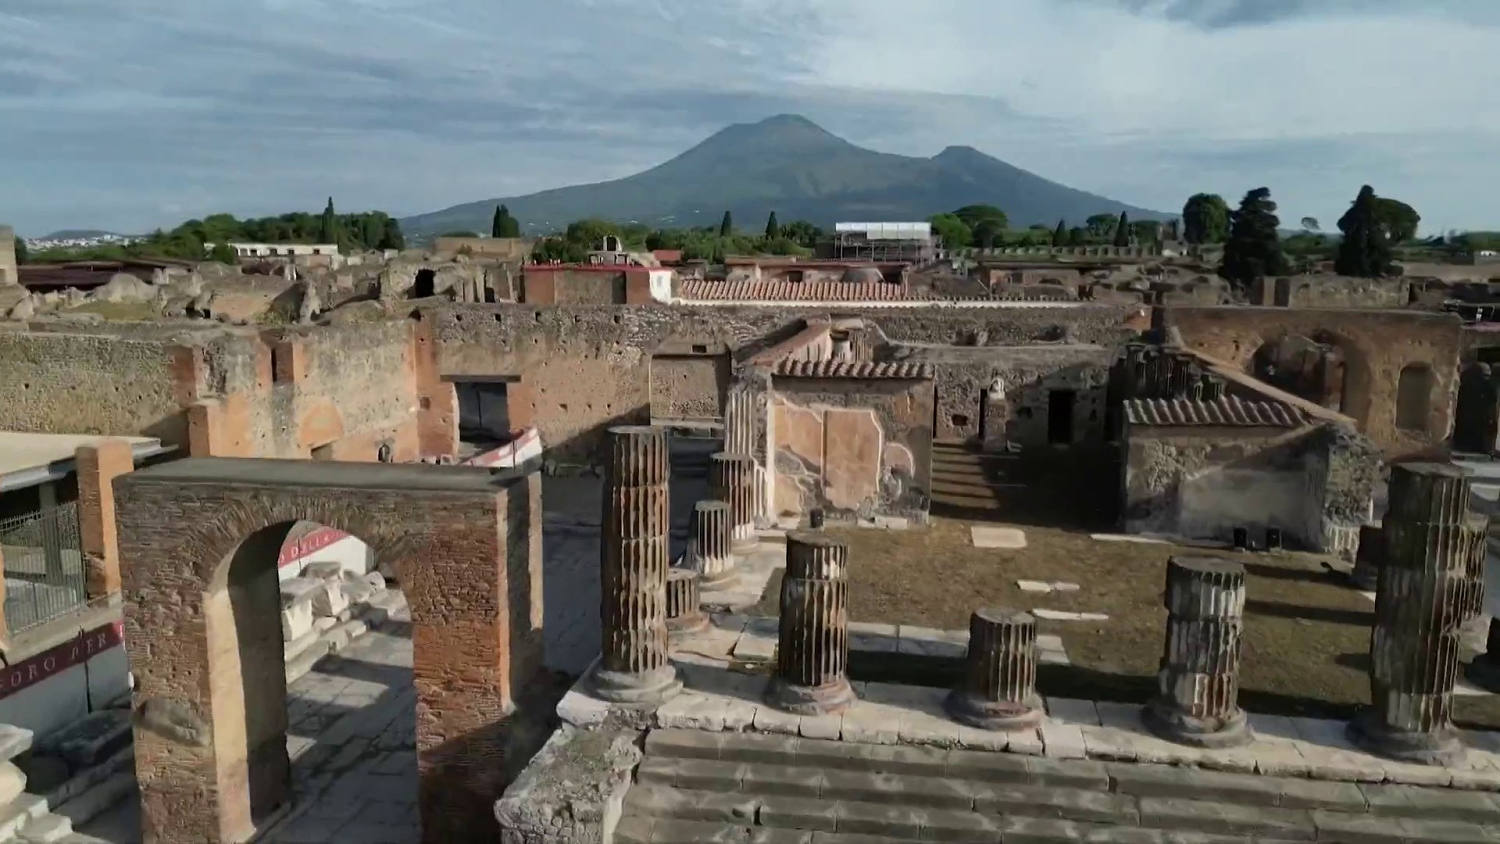 Pompeii excavation reveals "blue room" after nearly 2000 years